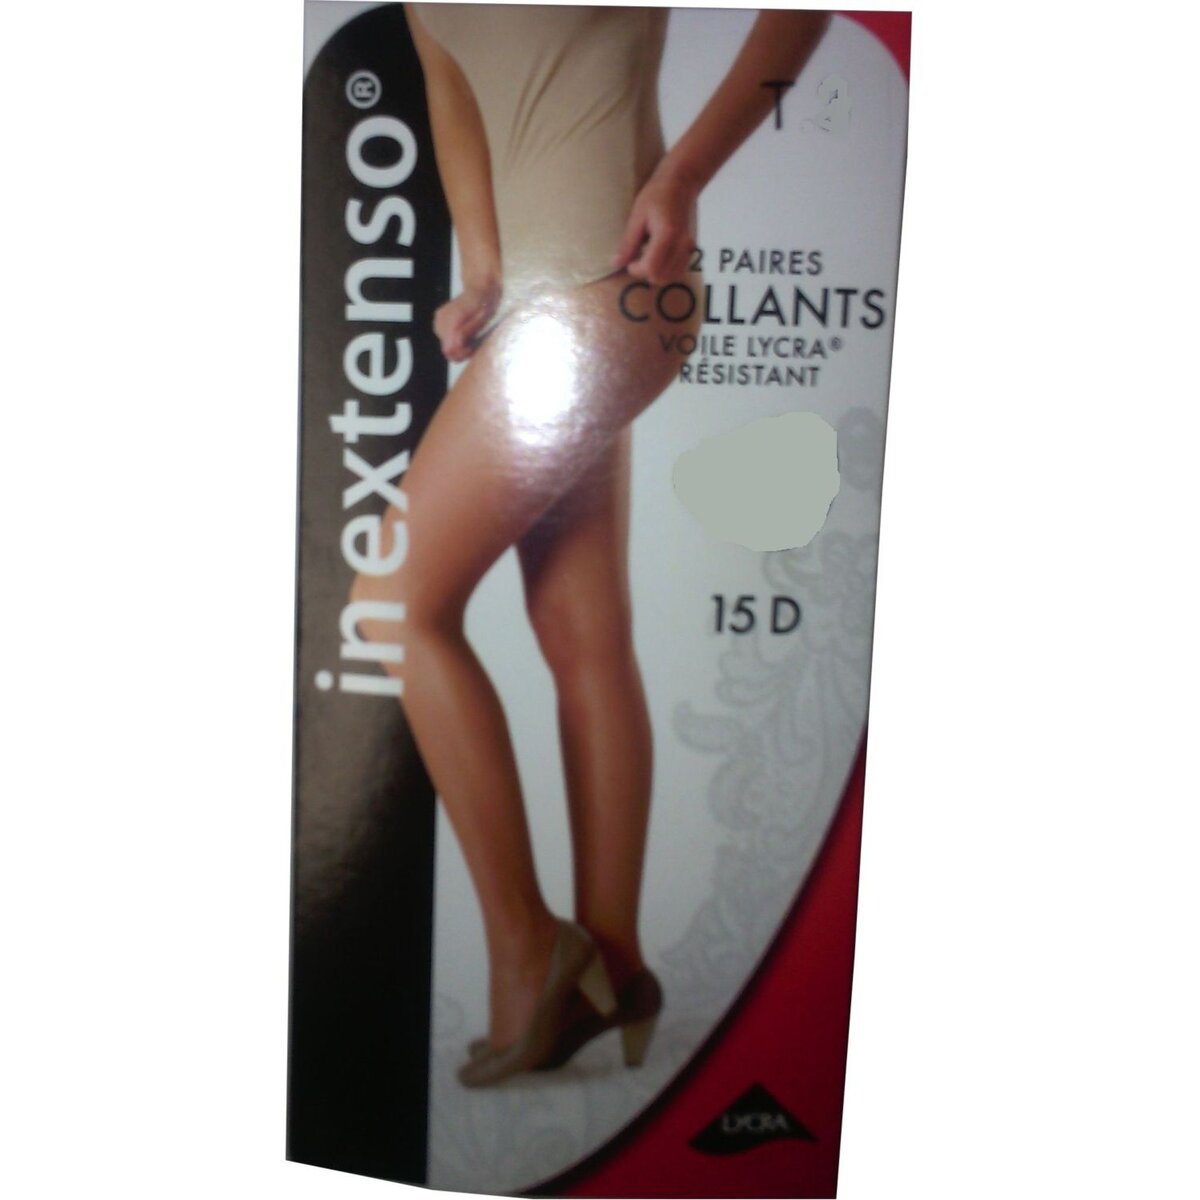 IN EXTENSO In Extenso duo collant voile lycra miel 15D taille 4